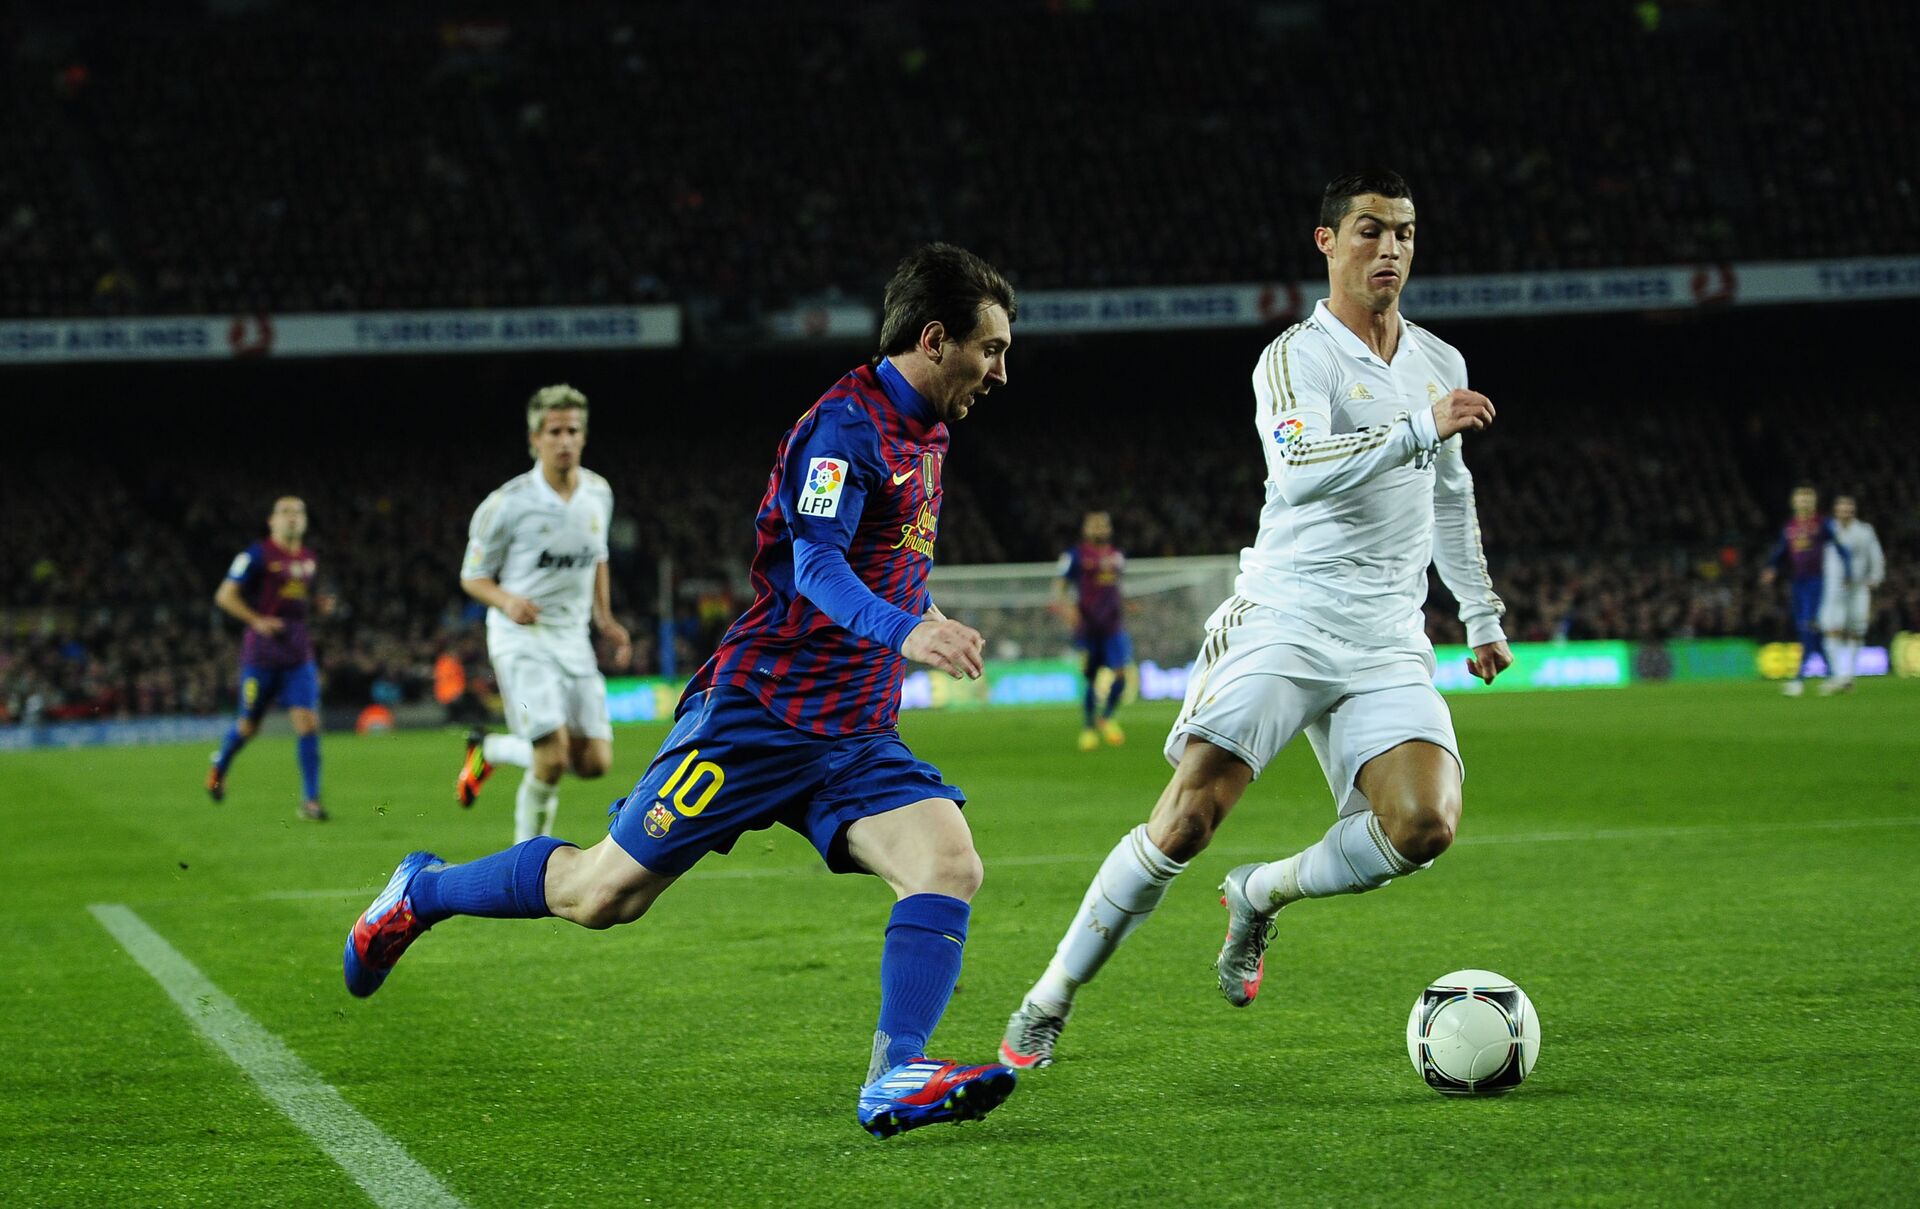 FC Barcelona's Lionel Messi, from Argentina, left, duels for the ball against Real Madrid's Cristiano Ronaldo, from Portugal, during their quarterfinal, second leg, Copa del Rey soccer match at the Camp Nou stadium, in Barcelona, Spain, Wednesday, Jan. 25, 2012 - Sputnik International, 1920, 07.09.2021